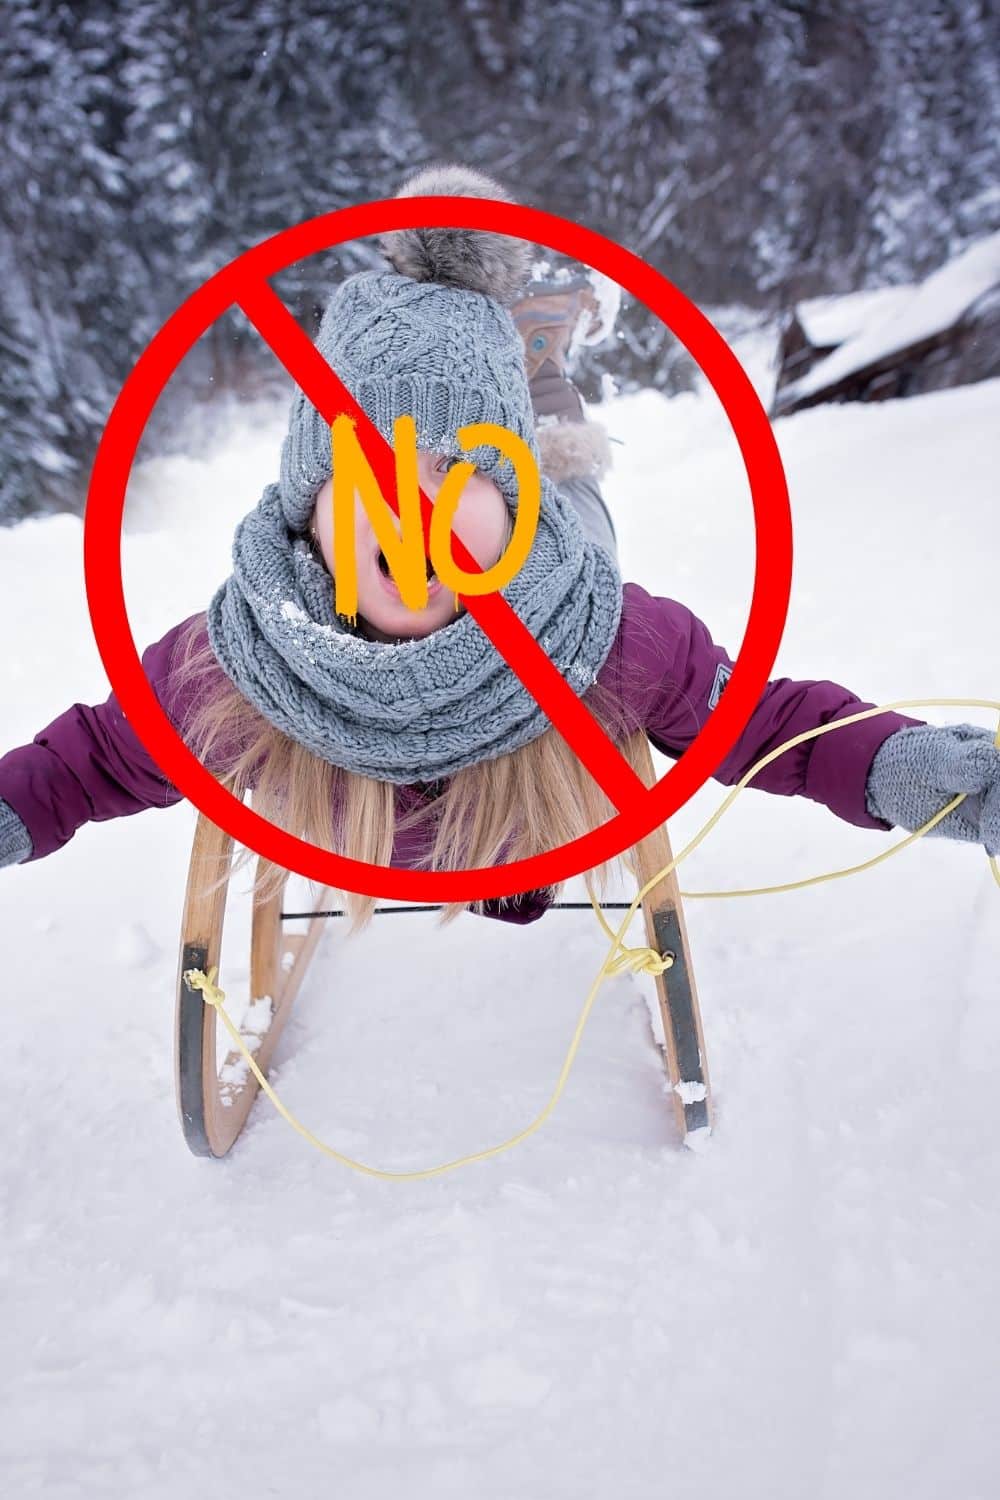 sledding safety tips never sled head first